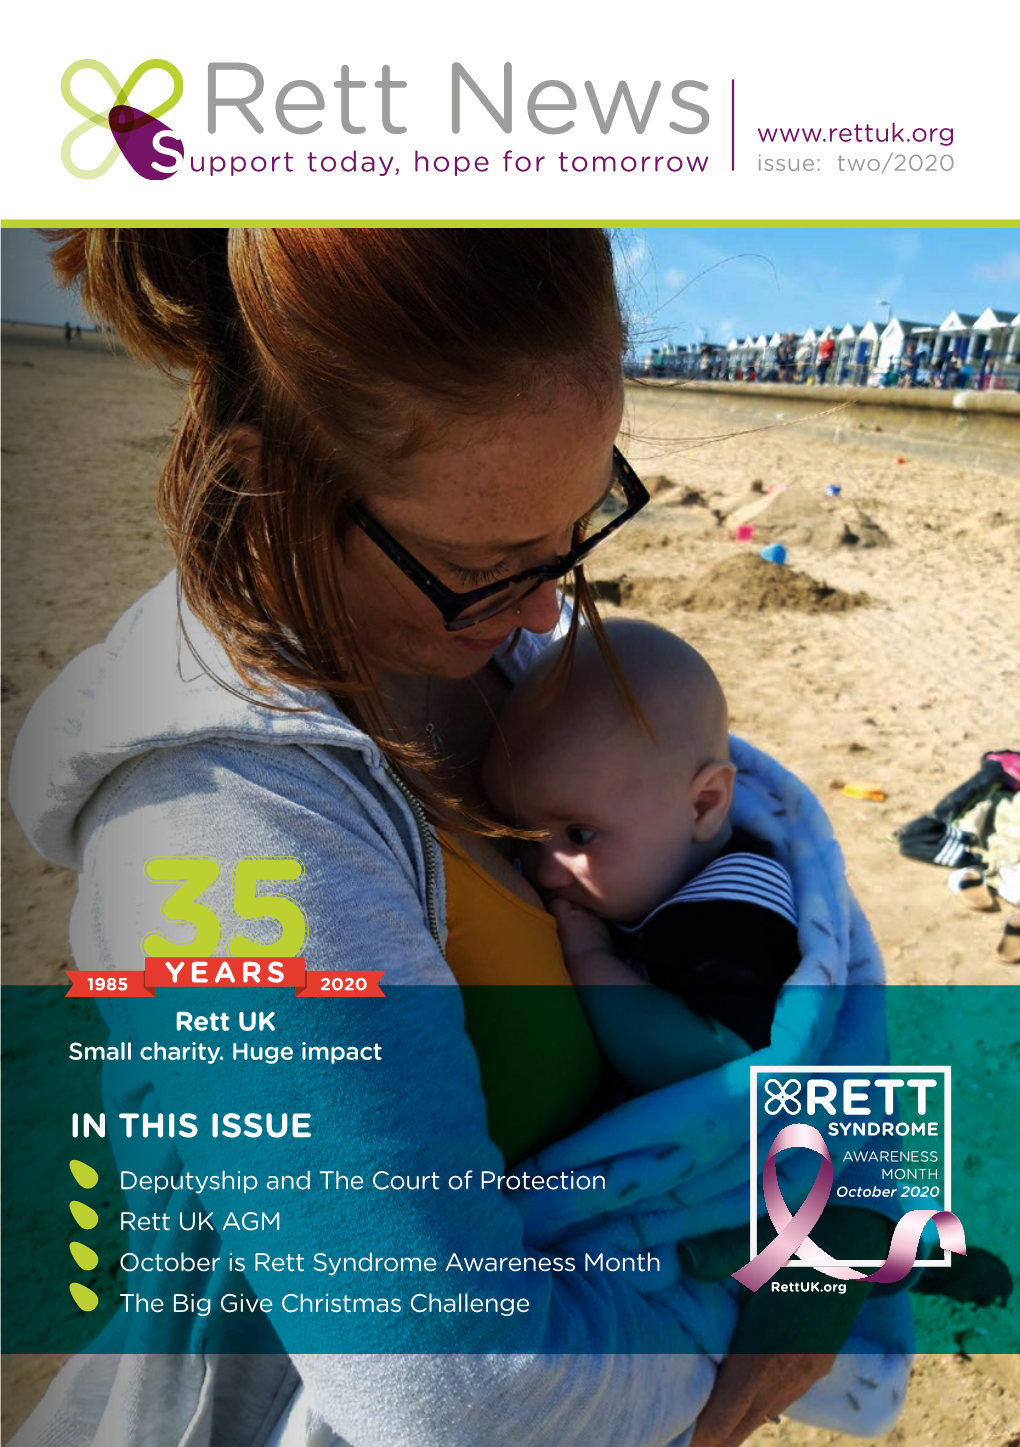 Rett News Support Today, Hope for Tomorrow Issue: Two/2020